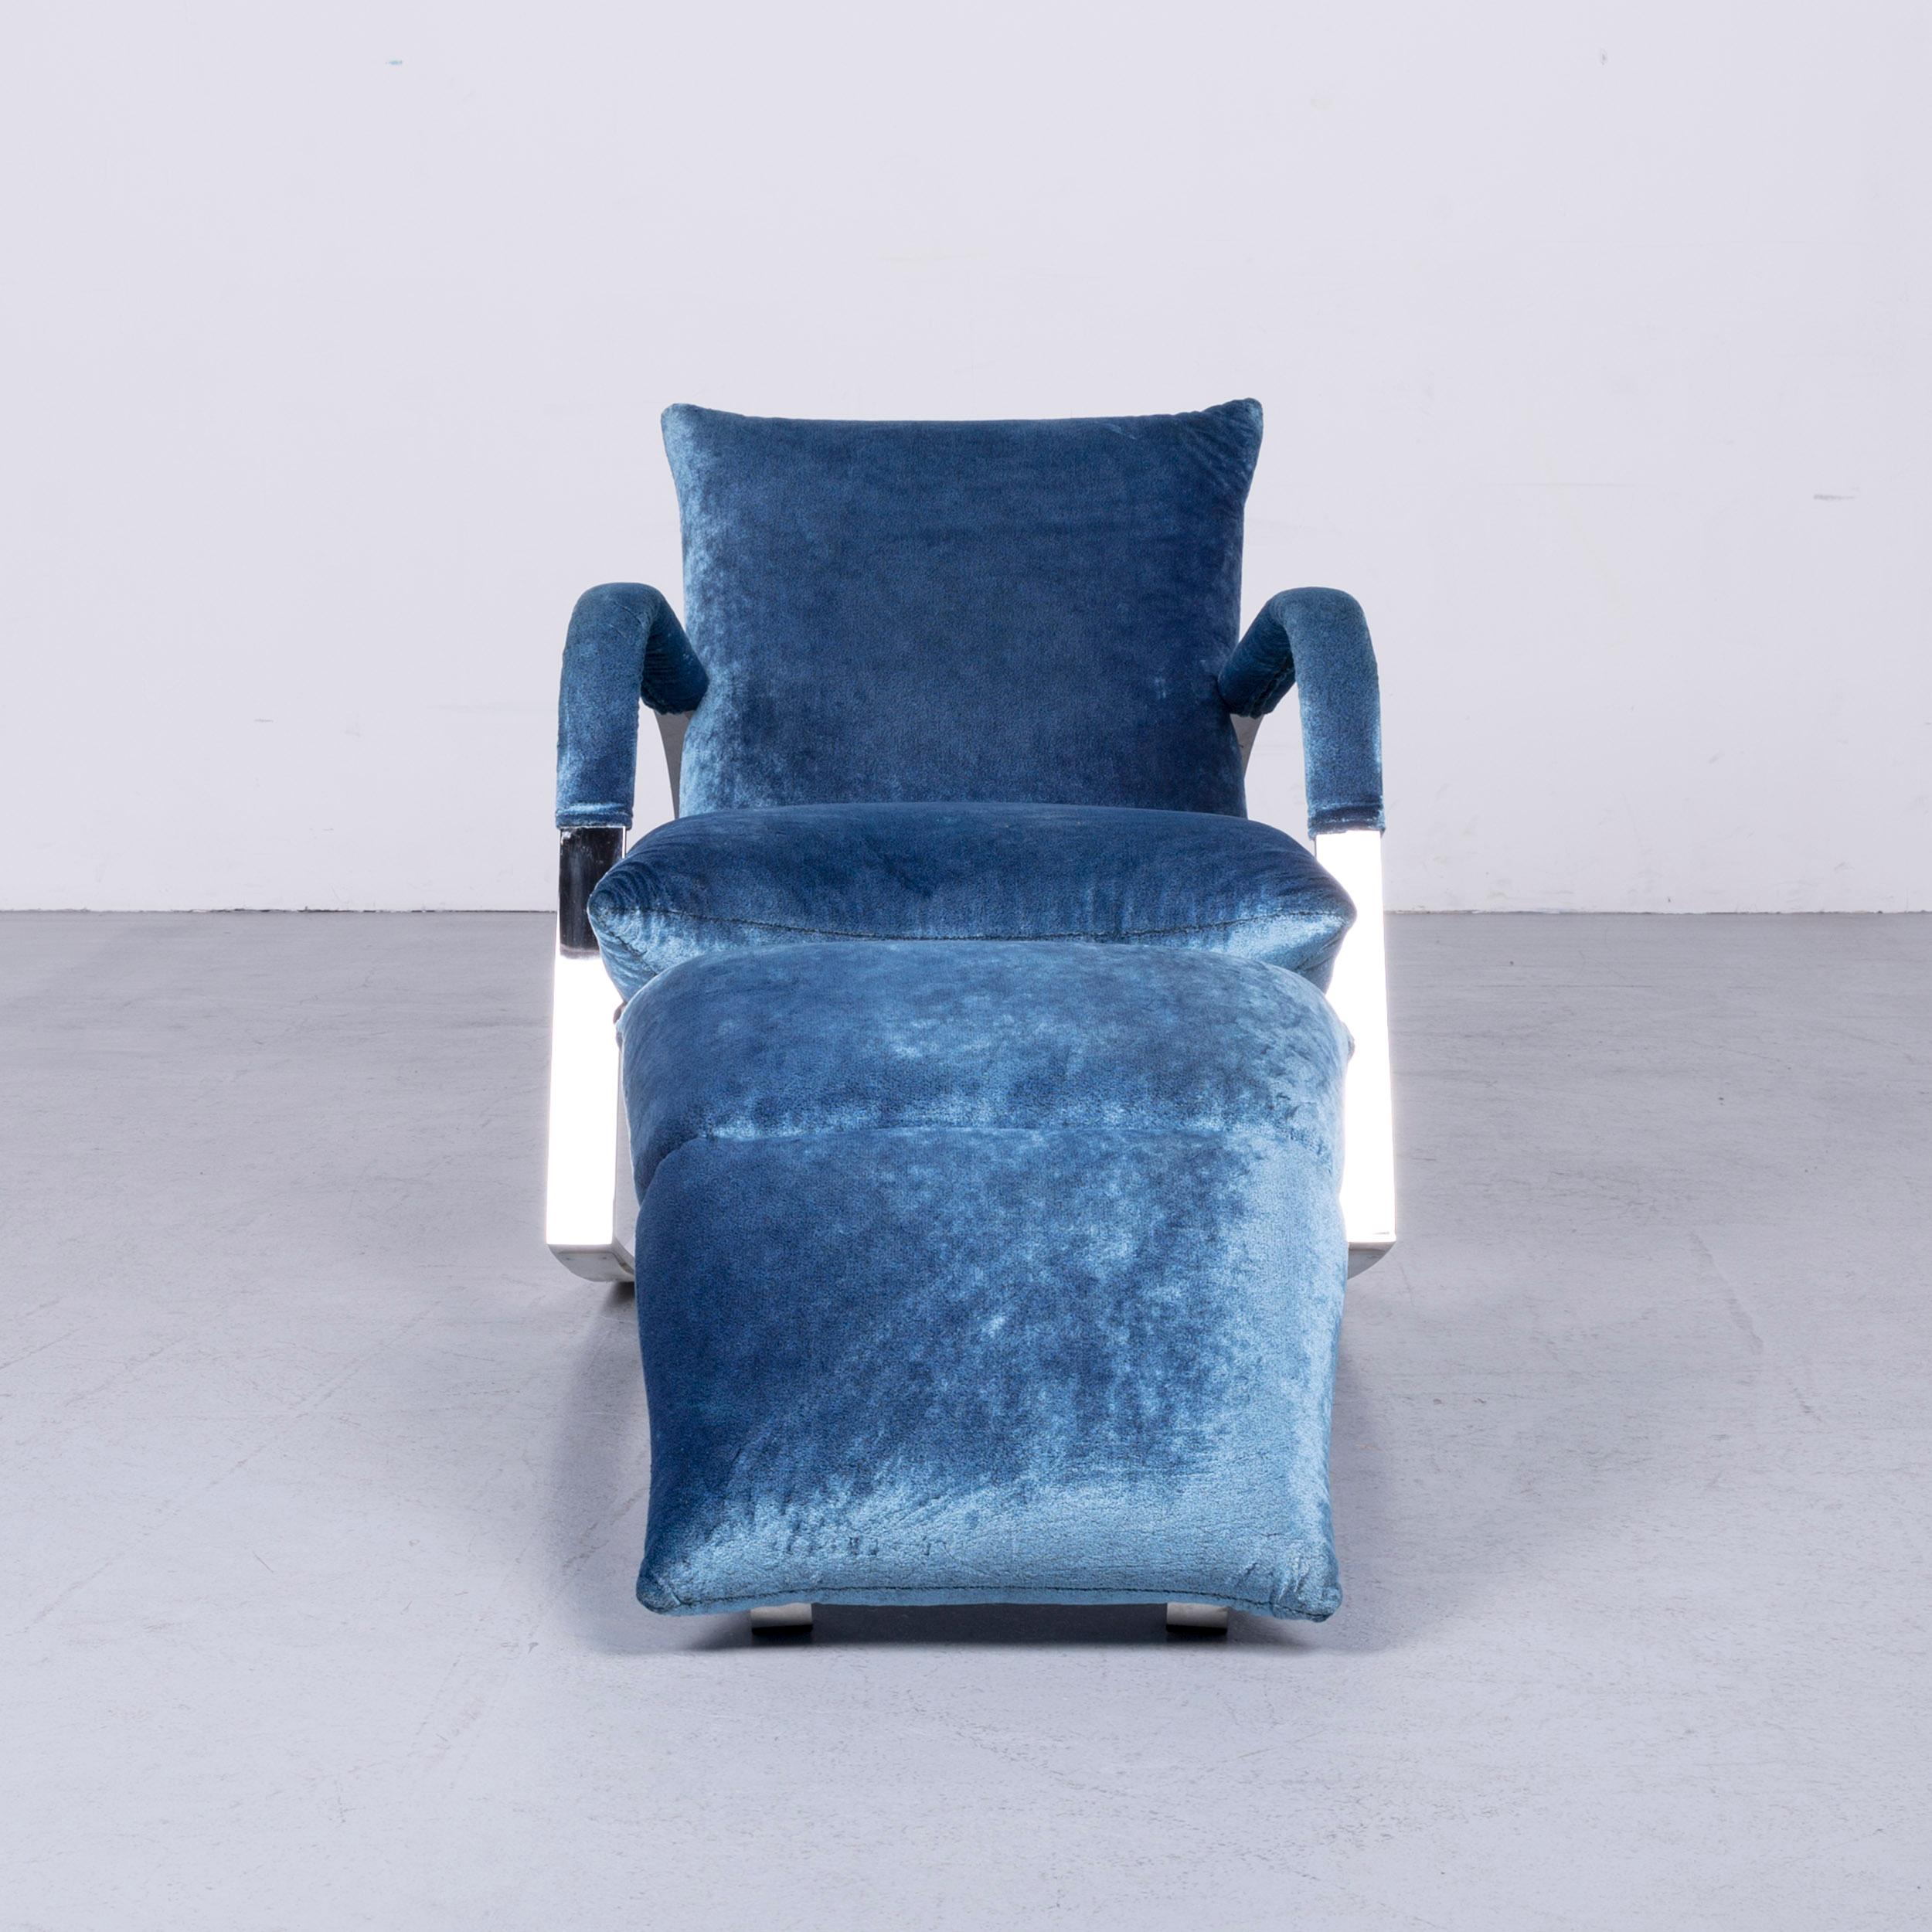 We bring to you a Bretz Highland B132 designer velvet blue armchair stool recliner.

Product measurements in centimeters:

Depth 90
Width 70
Height 79
Seat-height 45
Rest-height 60
Seat-depth 55
Seat-width 57
Back-height 48.

  